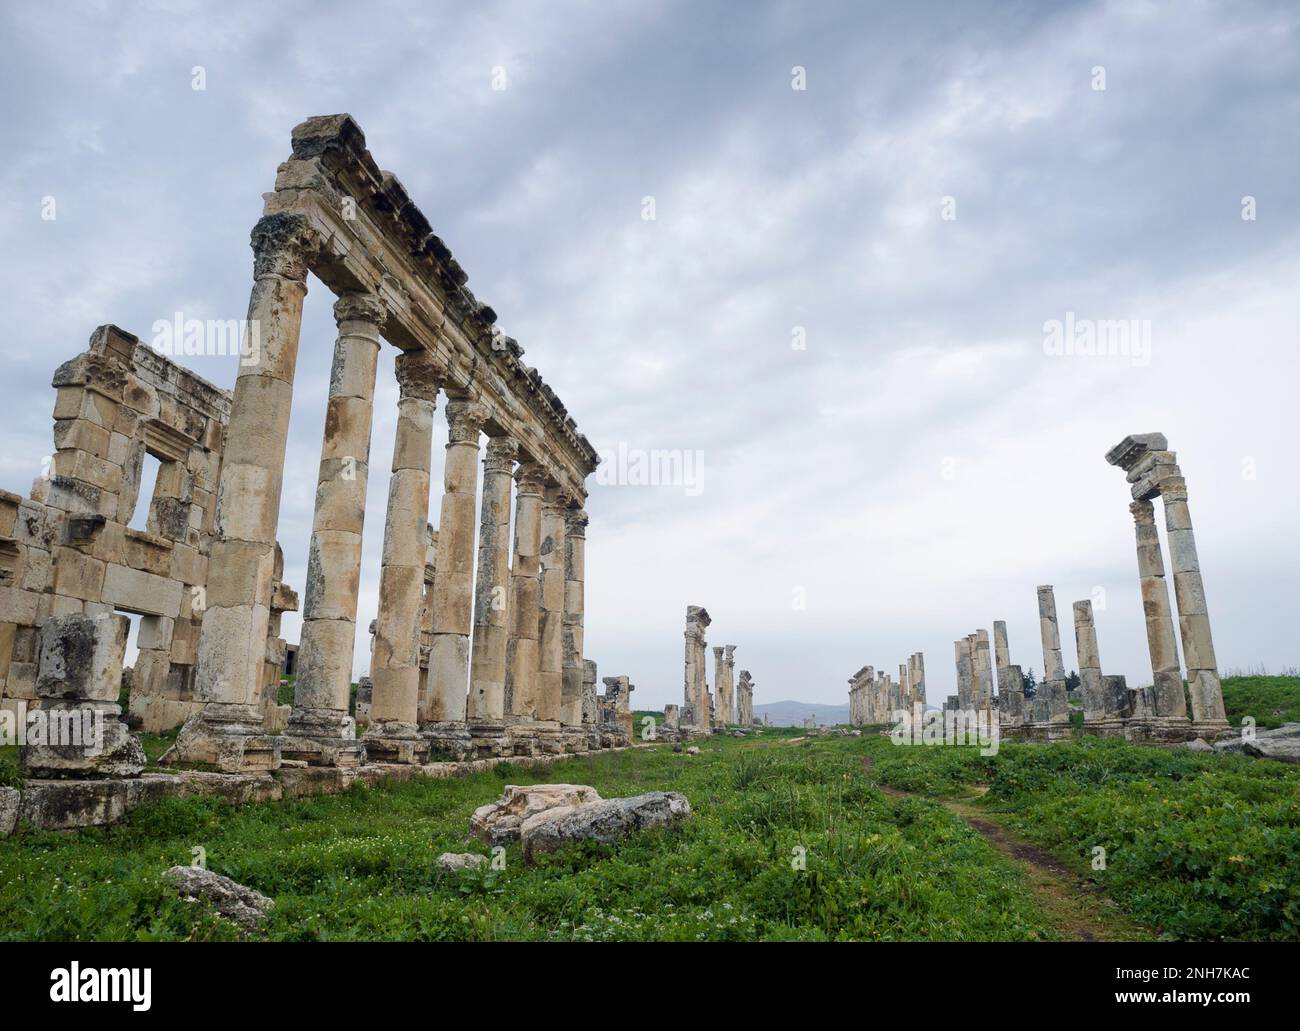 The Great Colonnade at Apamea  ancient roman ruins, Hama Governorate, Syria Stock Photo